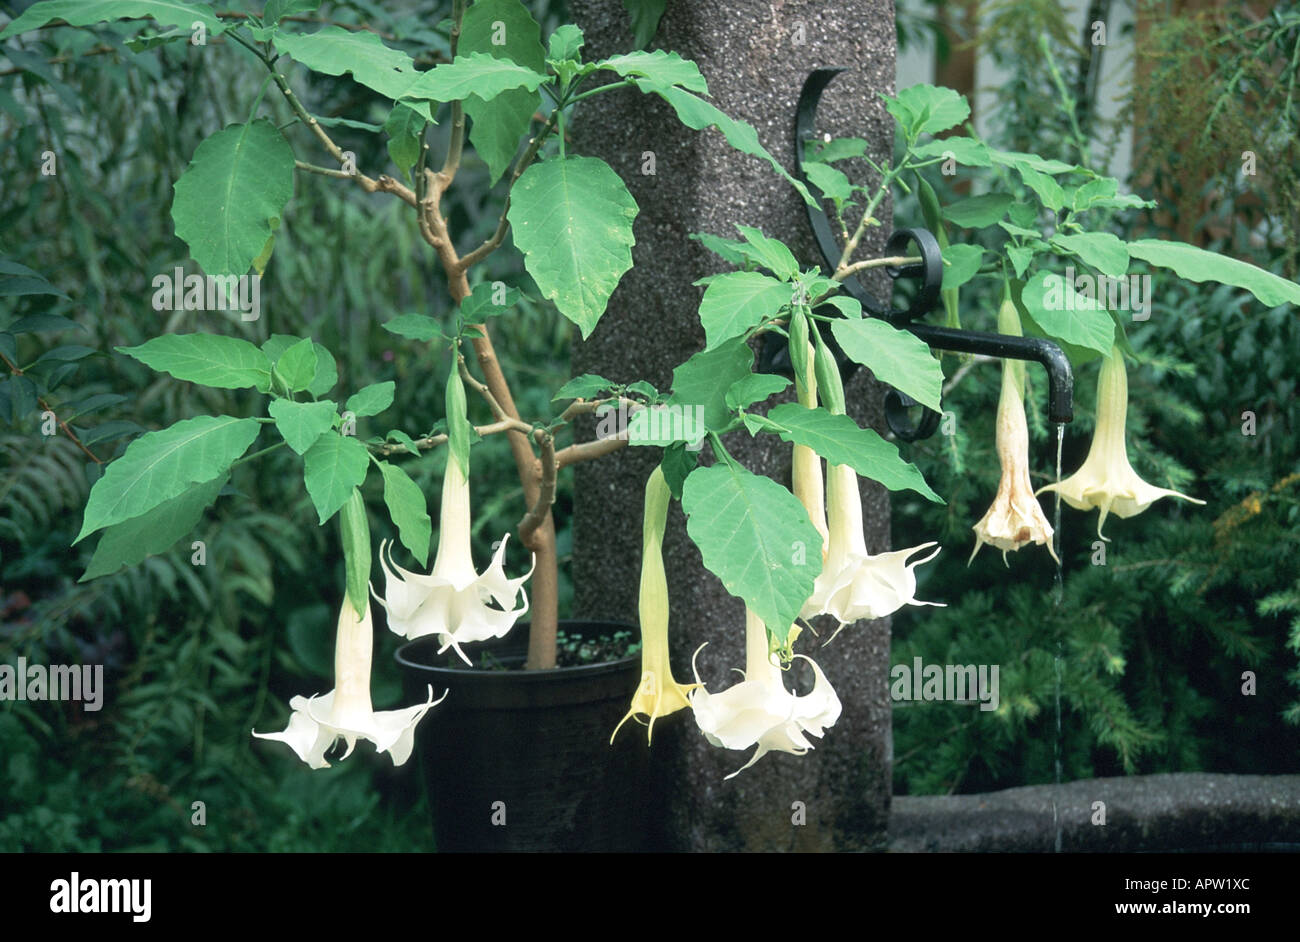 What is a Datura angel trumpet plant?